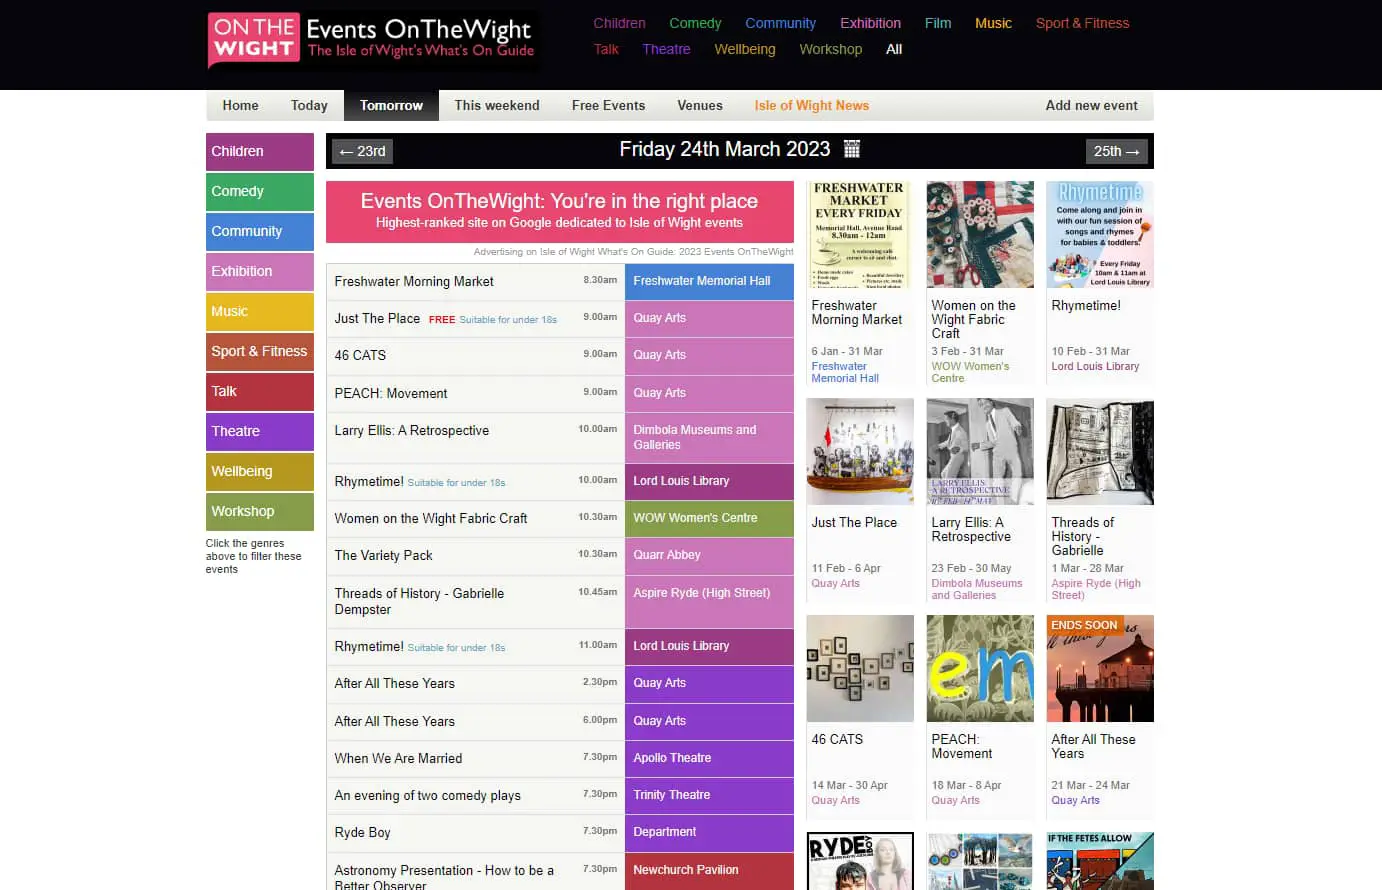 Screen Grab of the event listings site, showing a selection of the listings